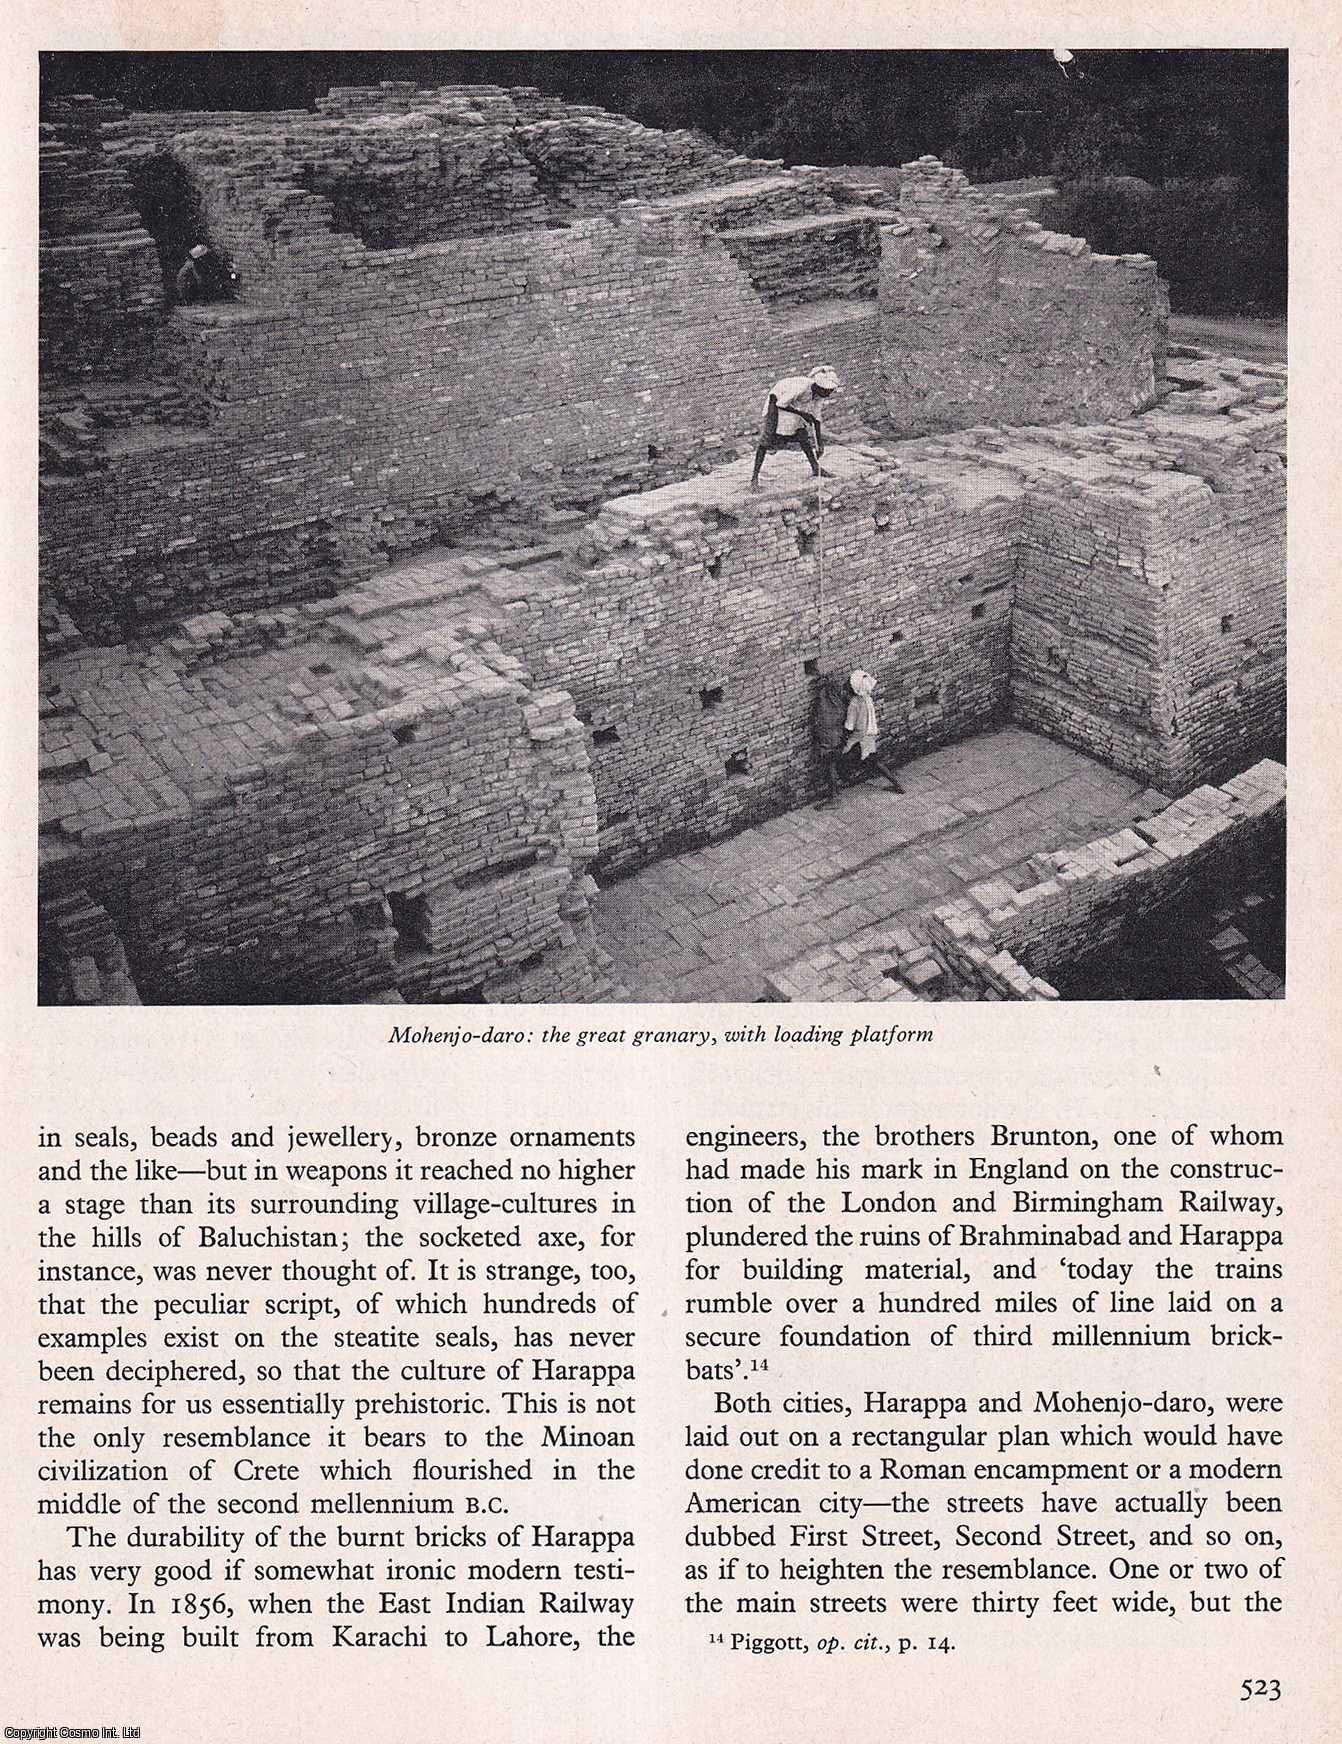 A.N. Marlow - The Cities of The Indus. Part 1. An original article from History Today magazine, 1967.